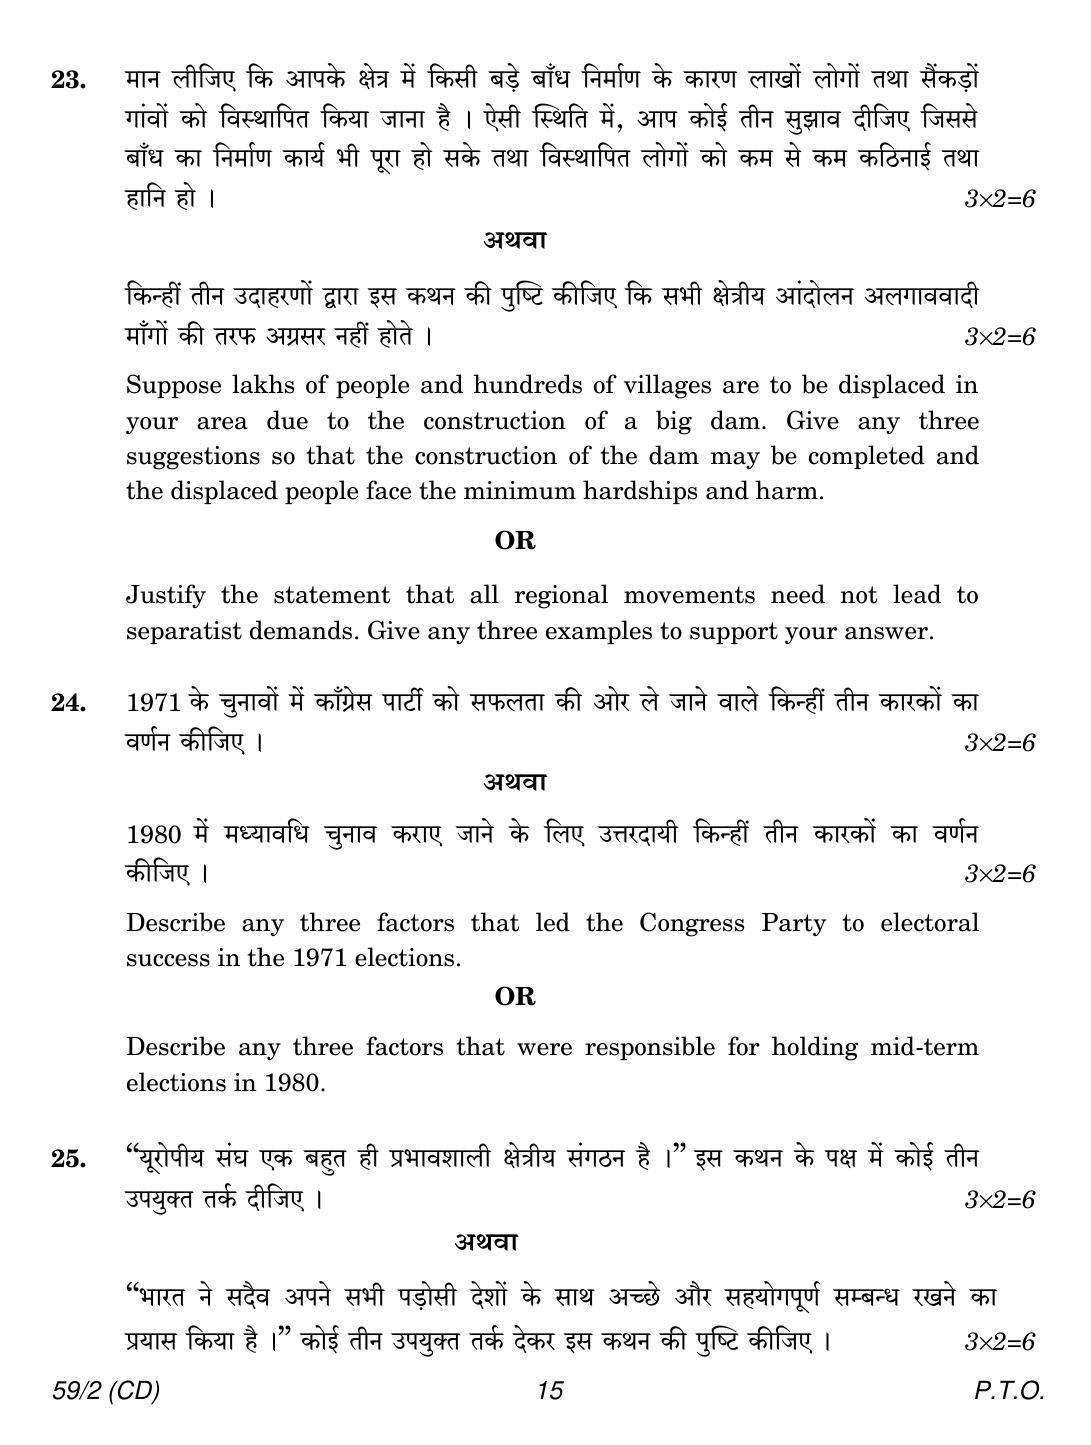 CBSE Class 12 59-2 POLITICAL SCIENCE CD 2018 Question Paper - Page 15